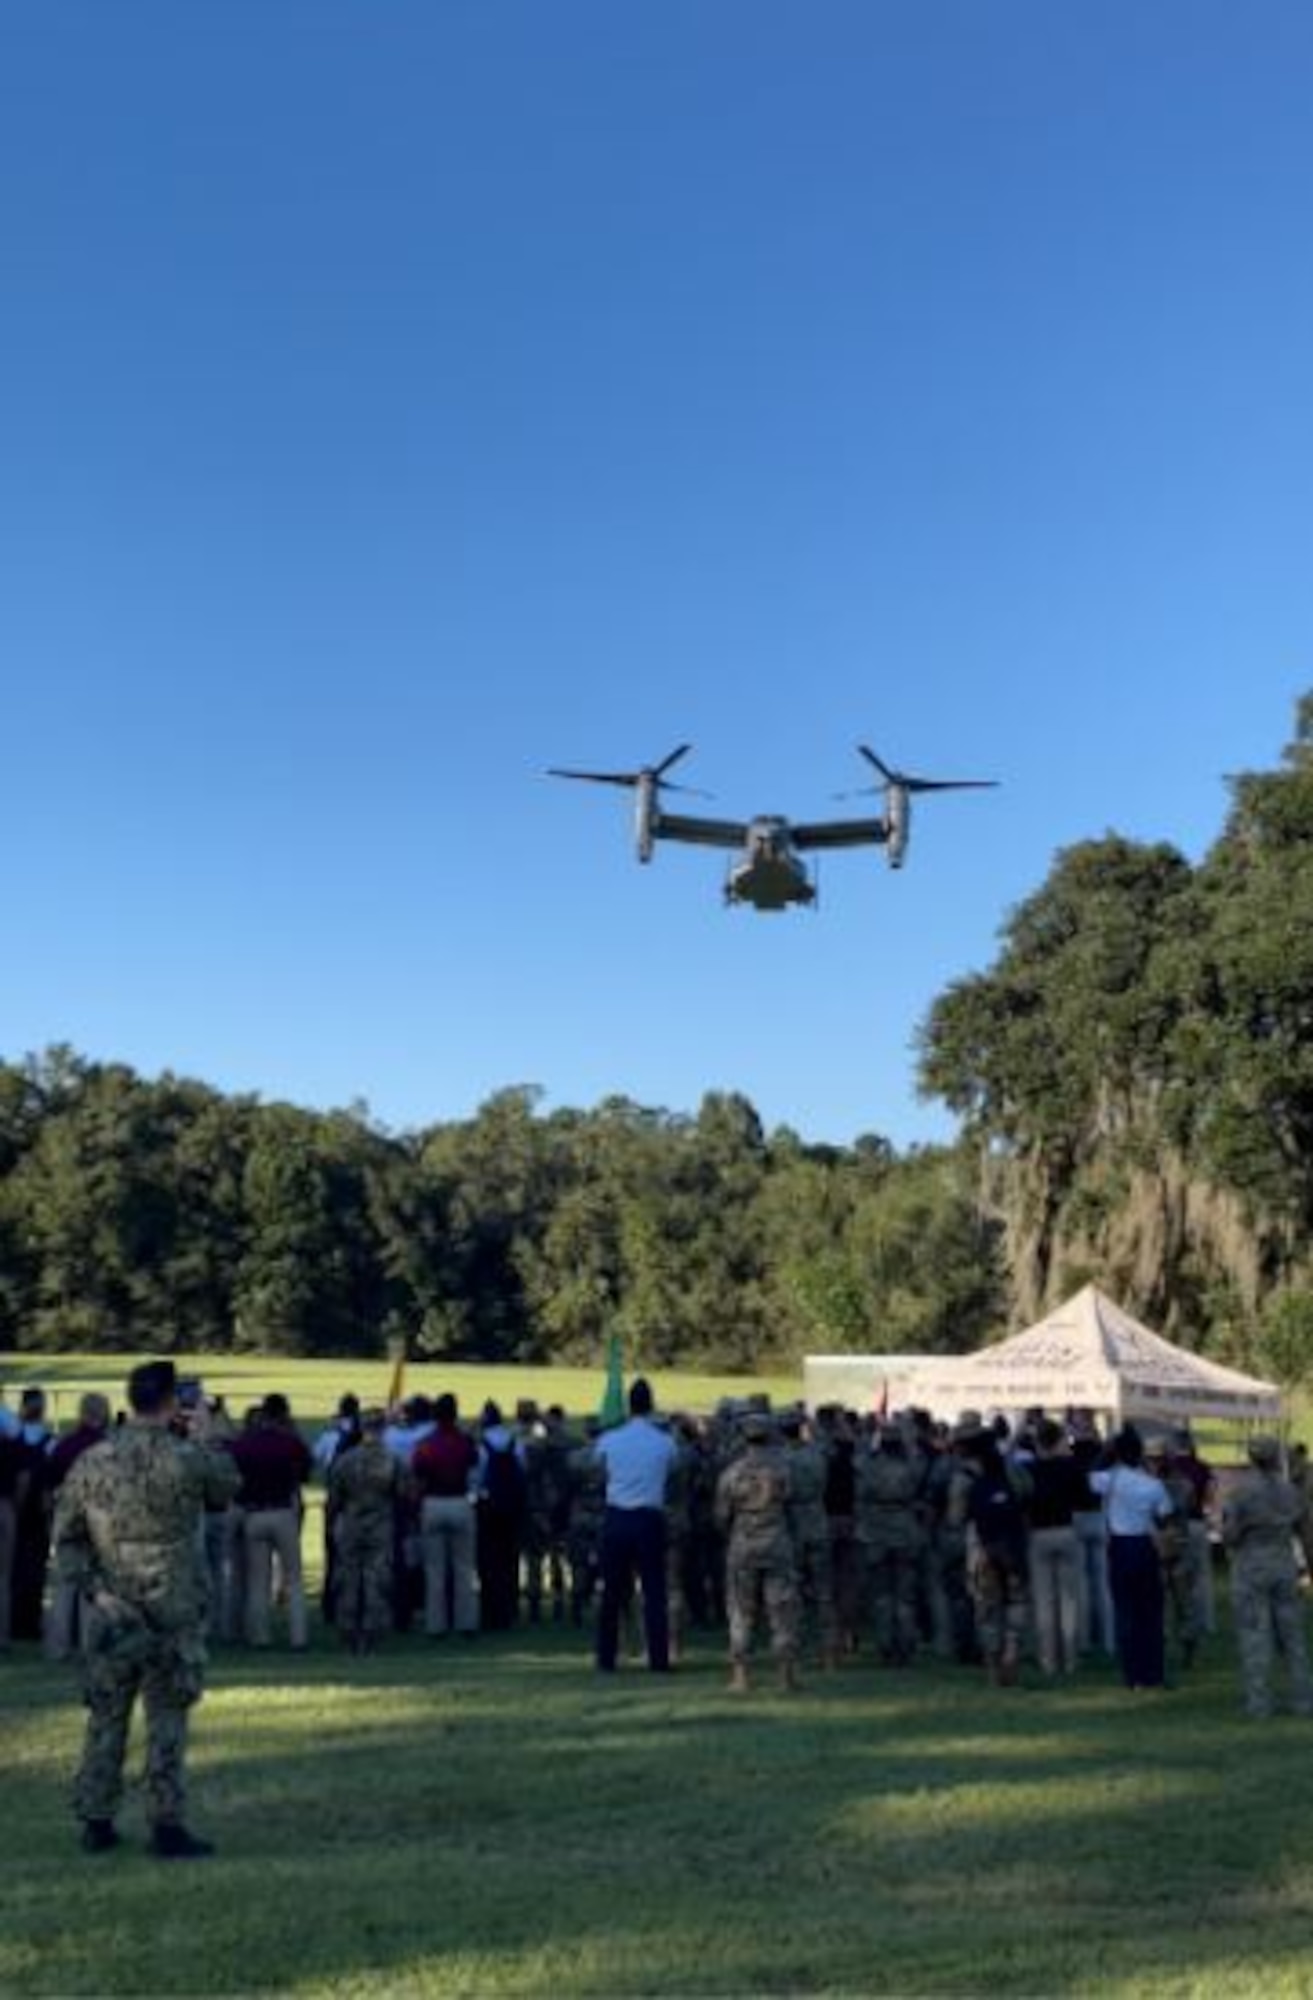 ROTC cadets from Florida State University and Florida A&M University watch as special tactics officers and pilots work together to land a CV-22B tiltrotor aircraft in a field at the FSU campus Sept. 23, 2021. The aircraft flew in and displayed its capability to hover and land vertically. (Courtesy photo)